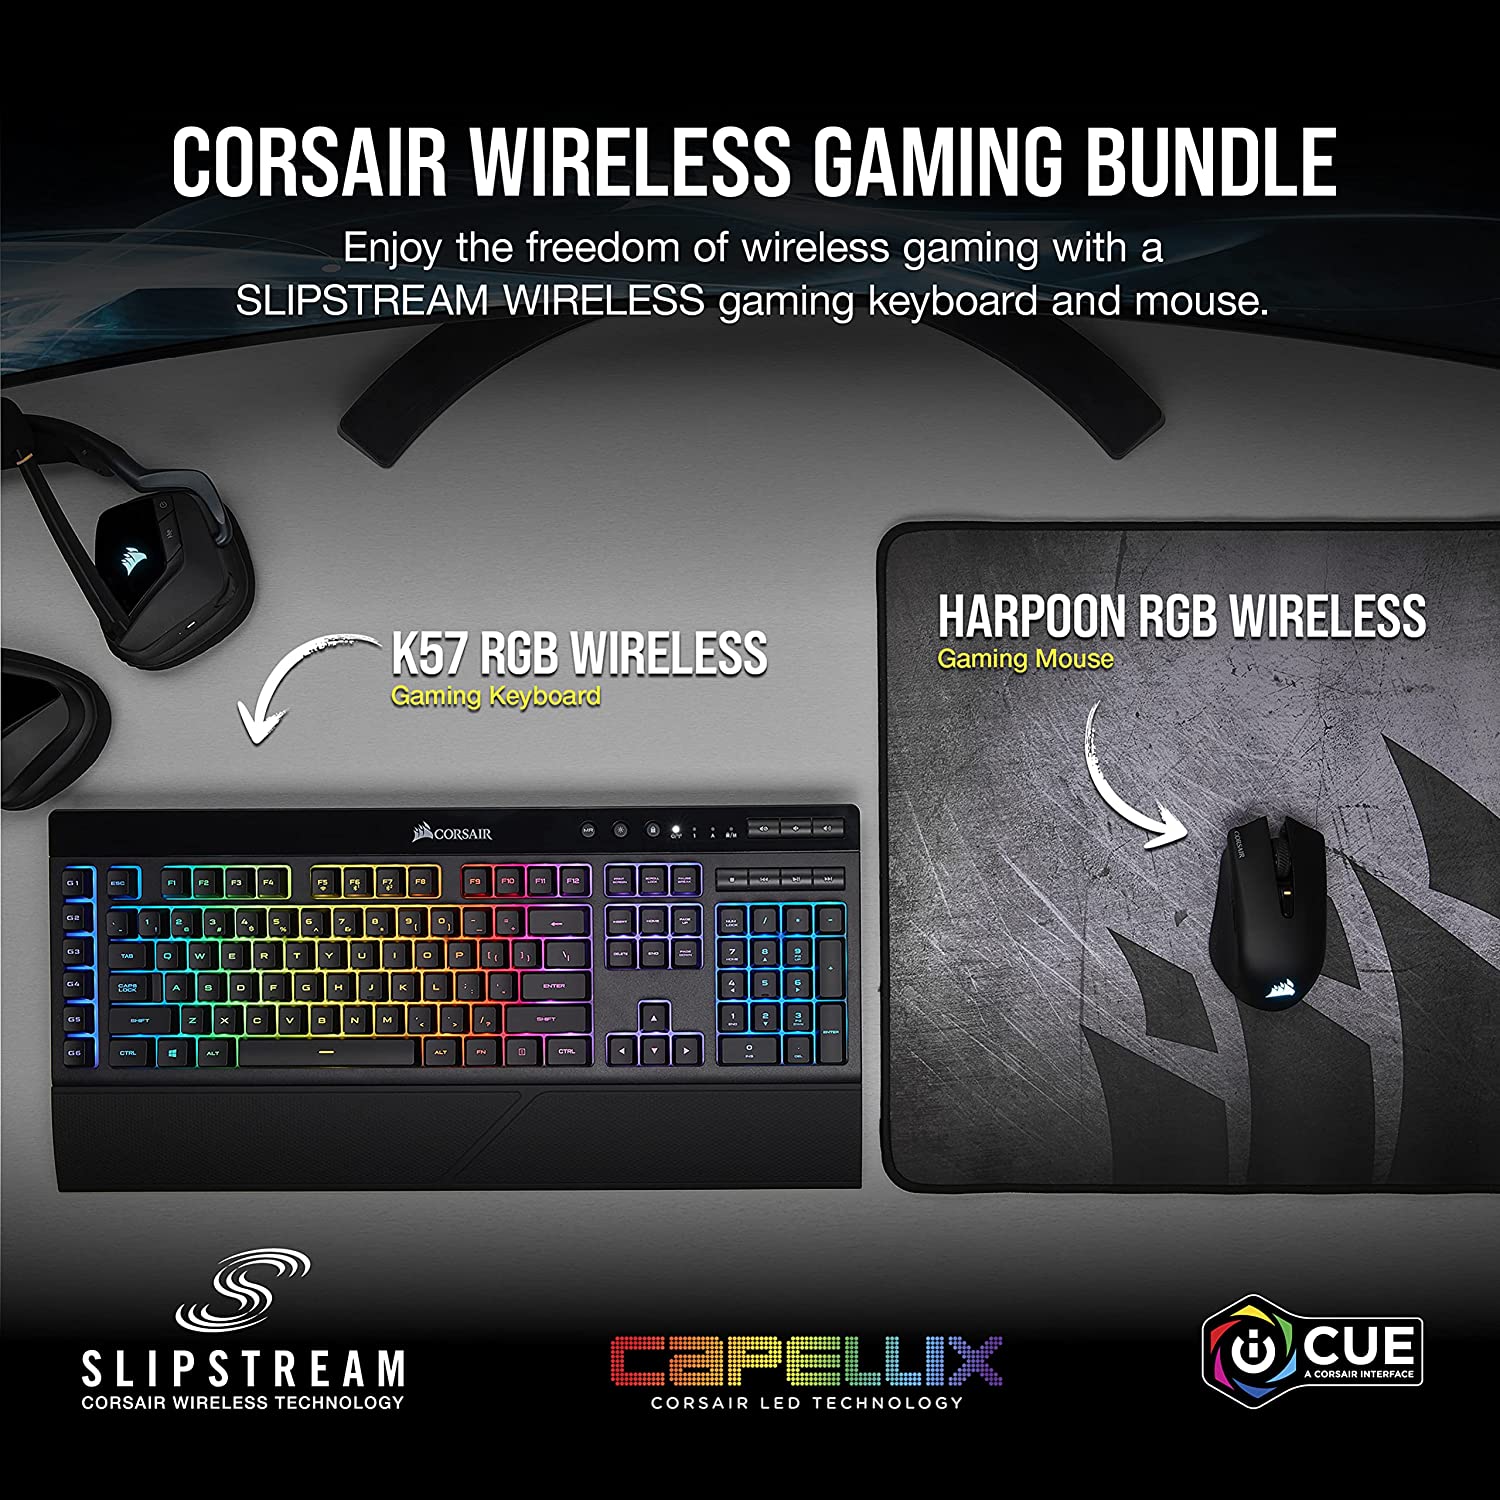 CORSAIR K57 RGB Wireless Gaming Keyboard ＜1ms Response time with Slipstream Wireless Connect with USB dongle, Bluetooth or Wired Individually B